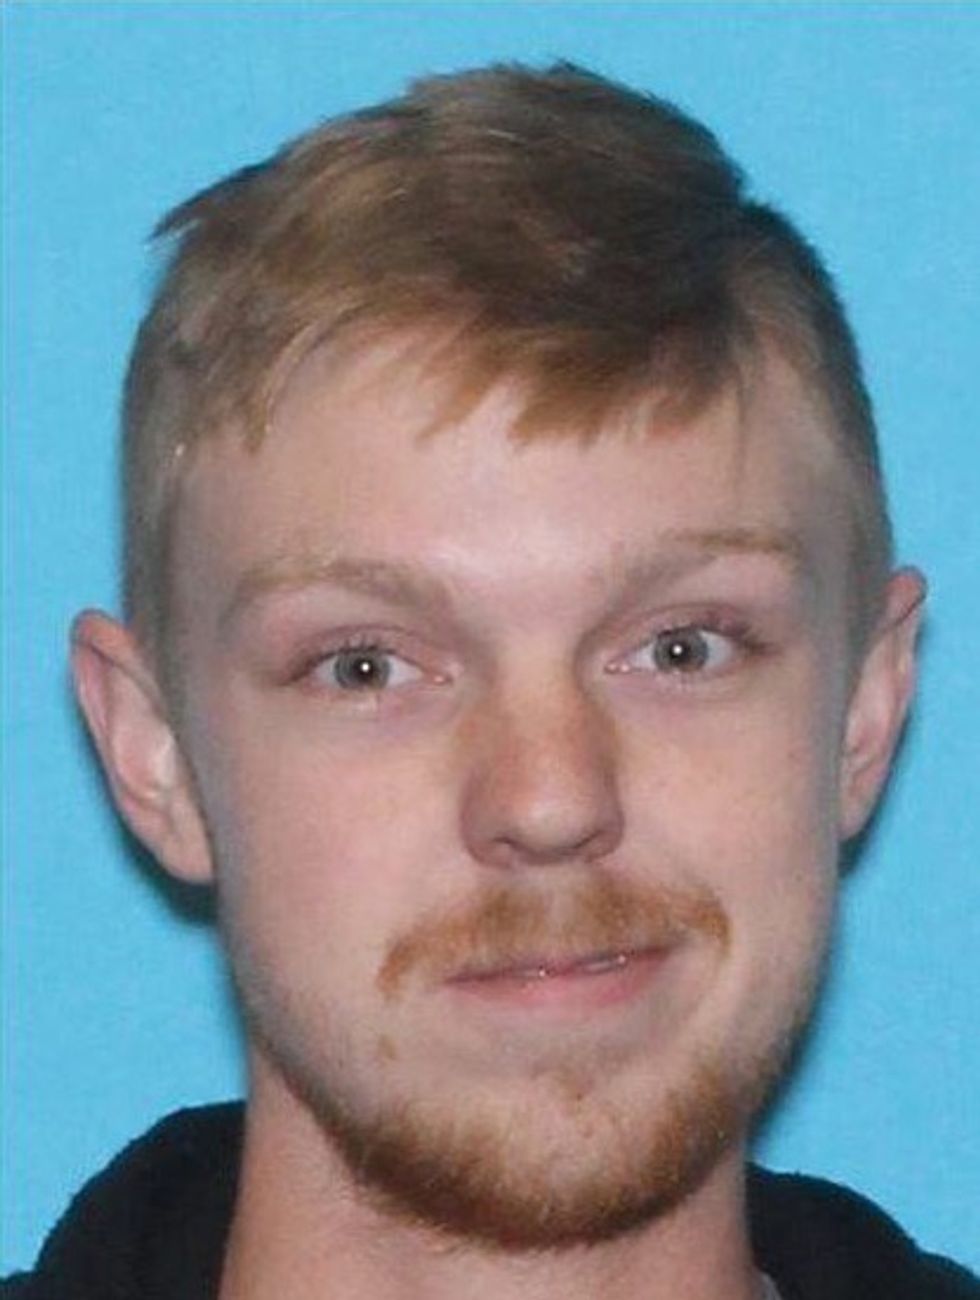 Affluenza' Teen Detained in Mexico After Disappearing With Mother